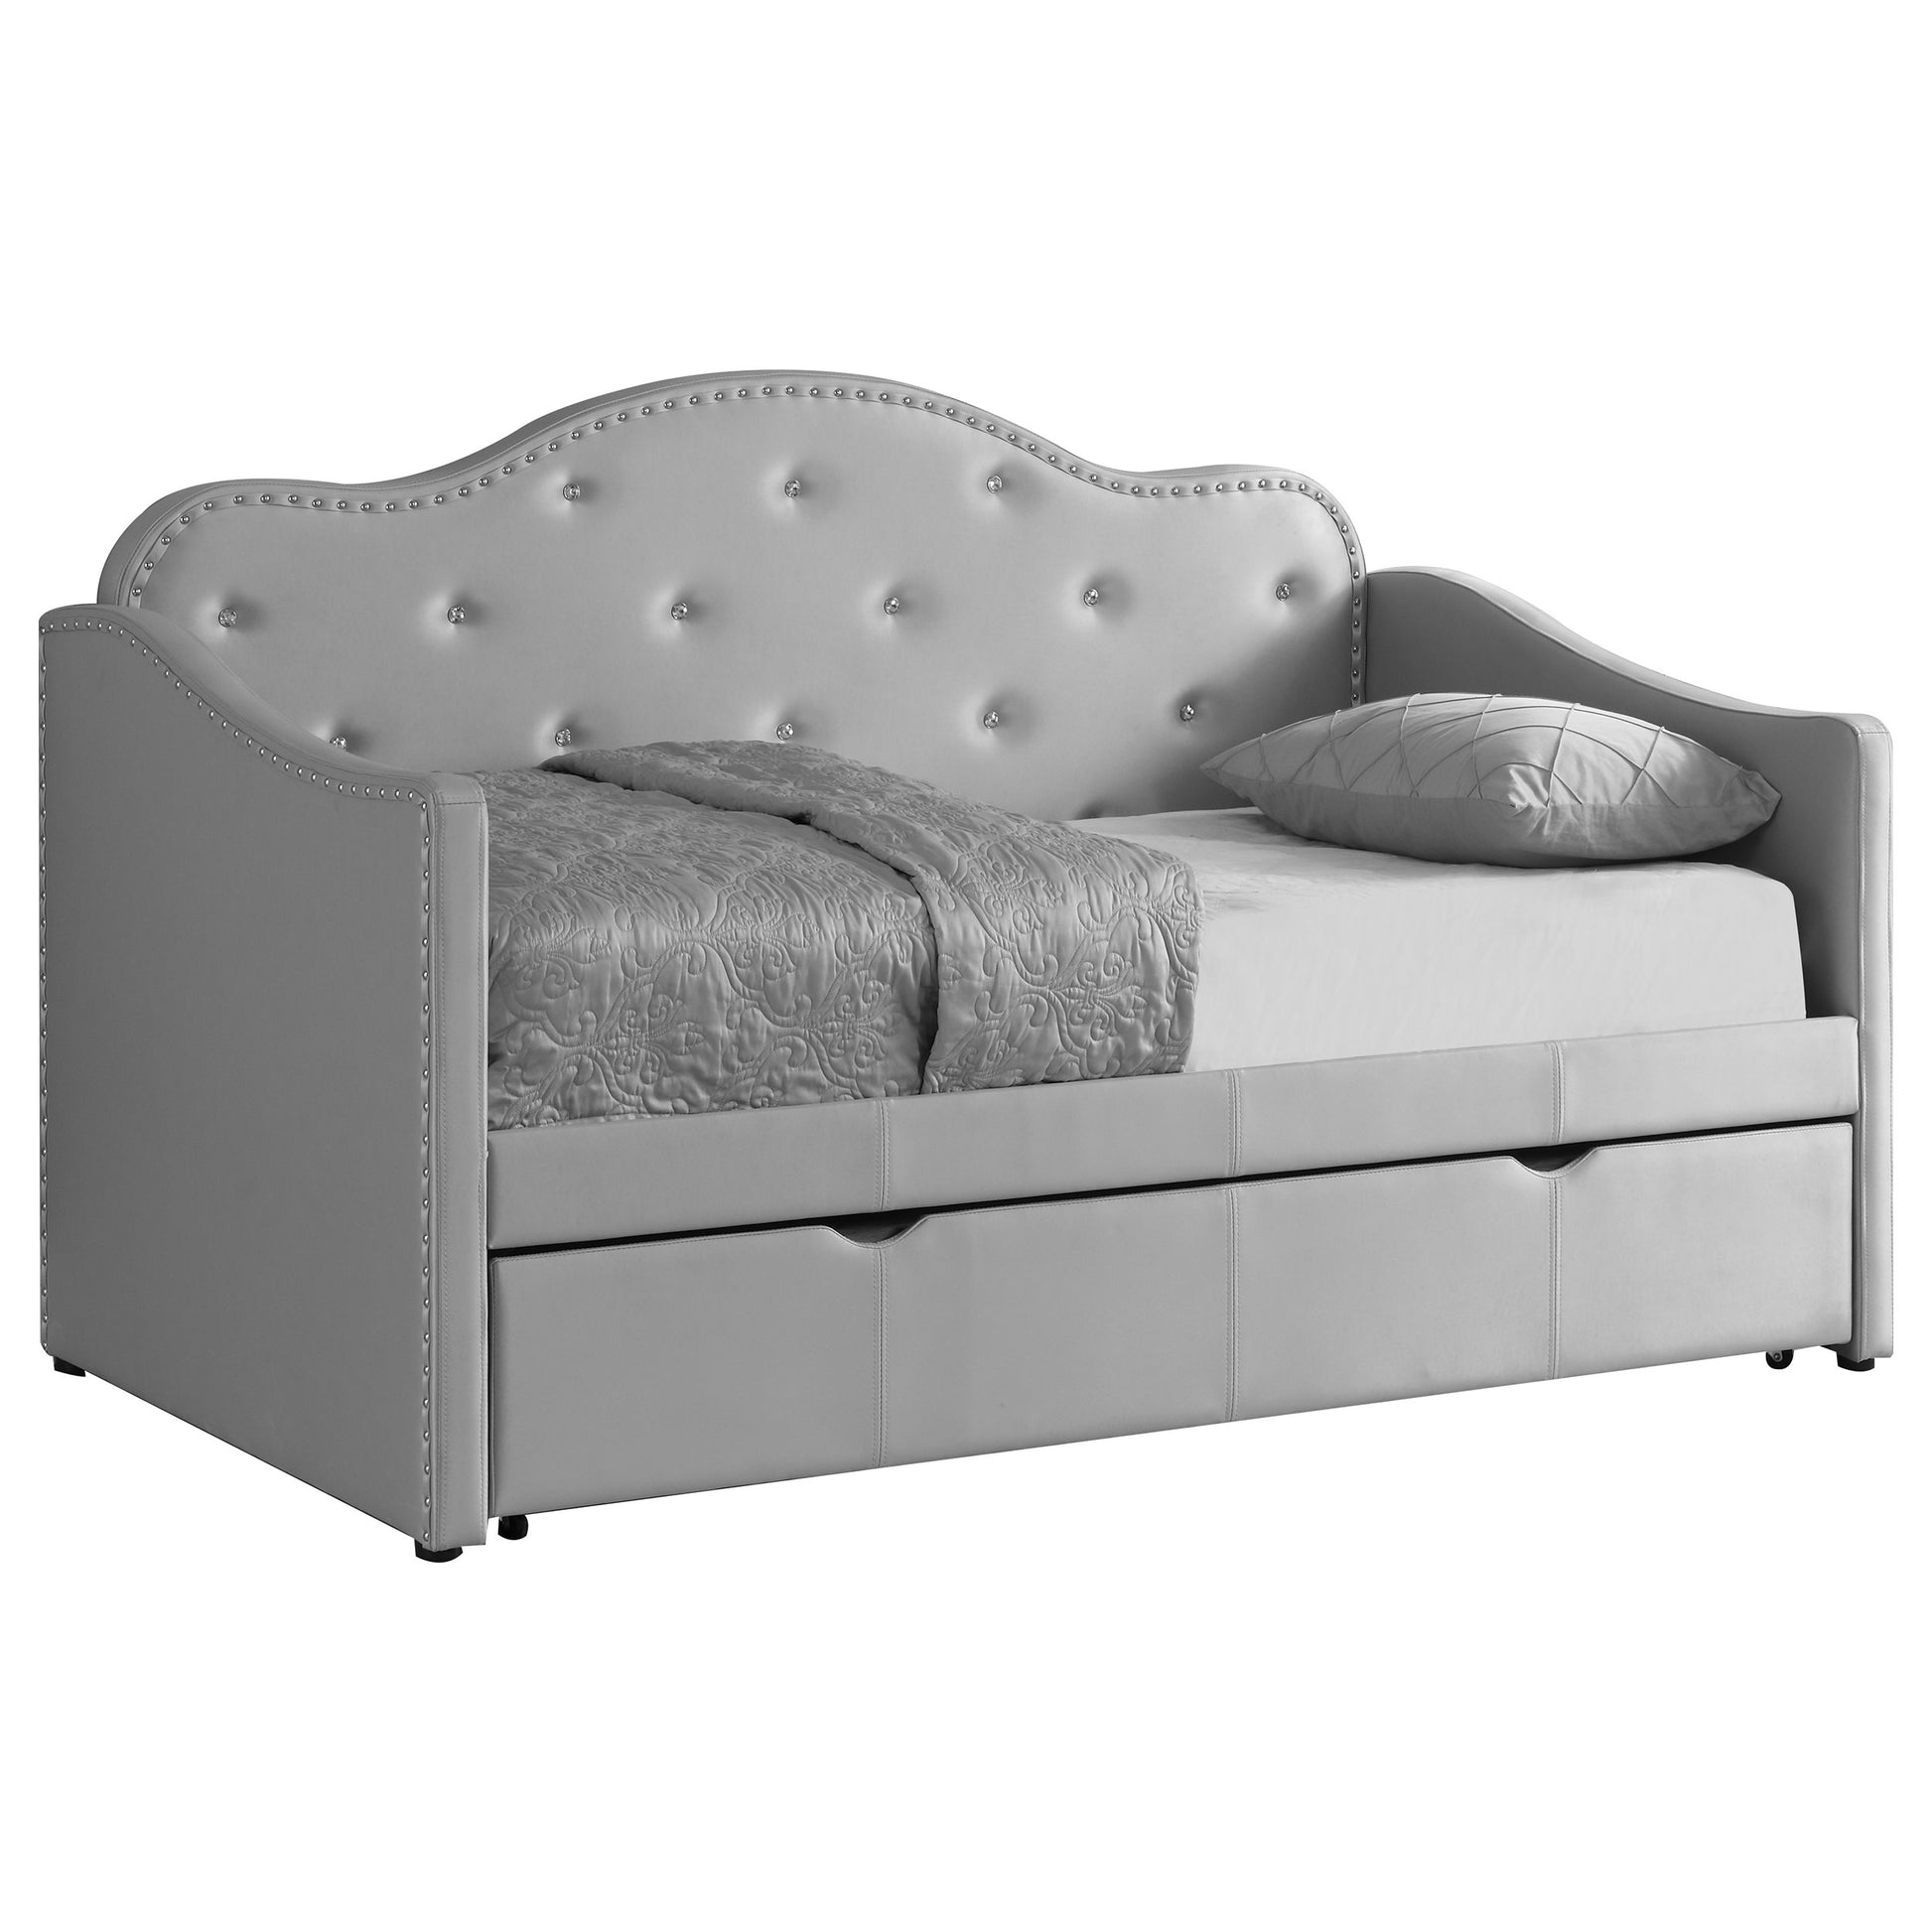 Twin Daybed W/ Trundle